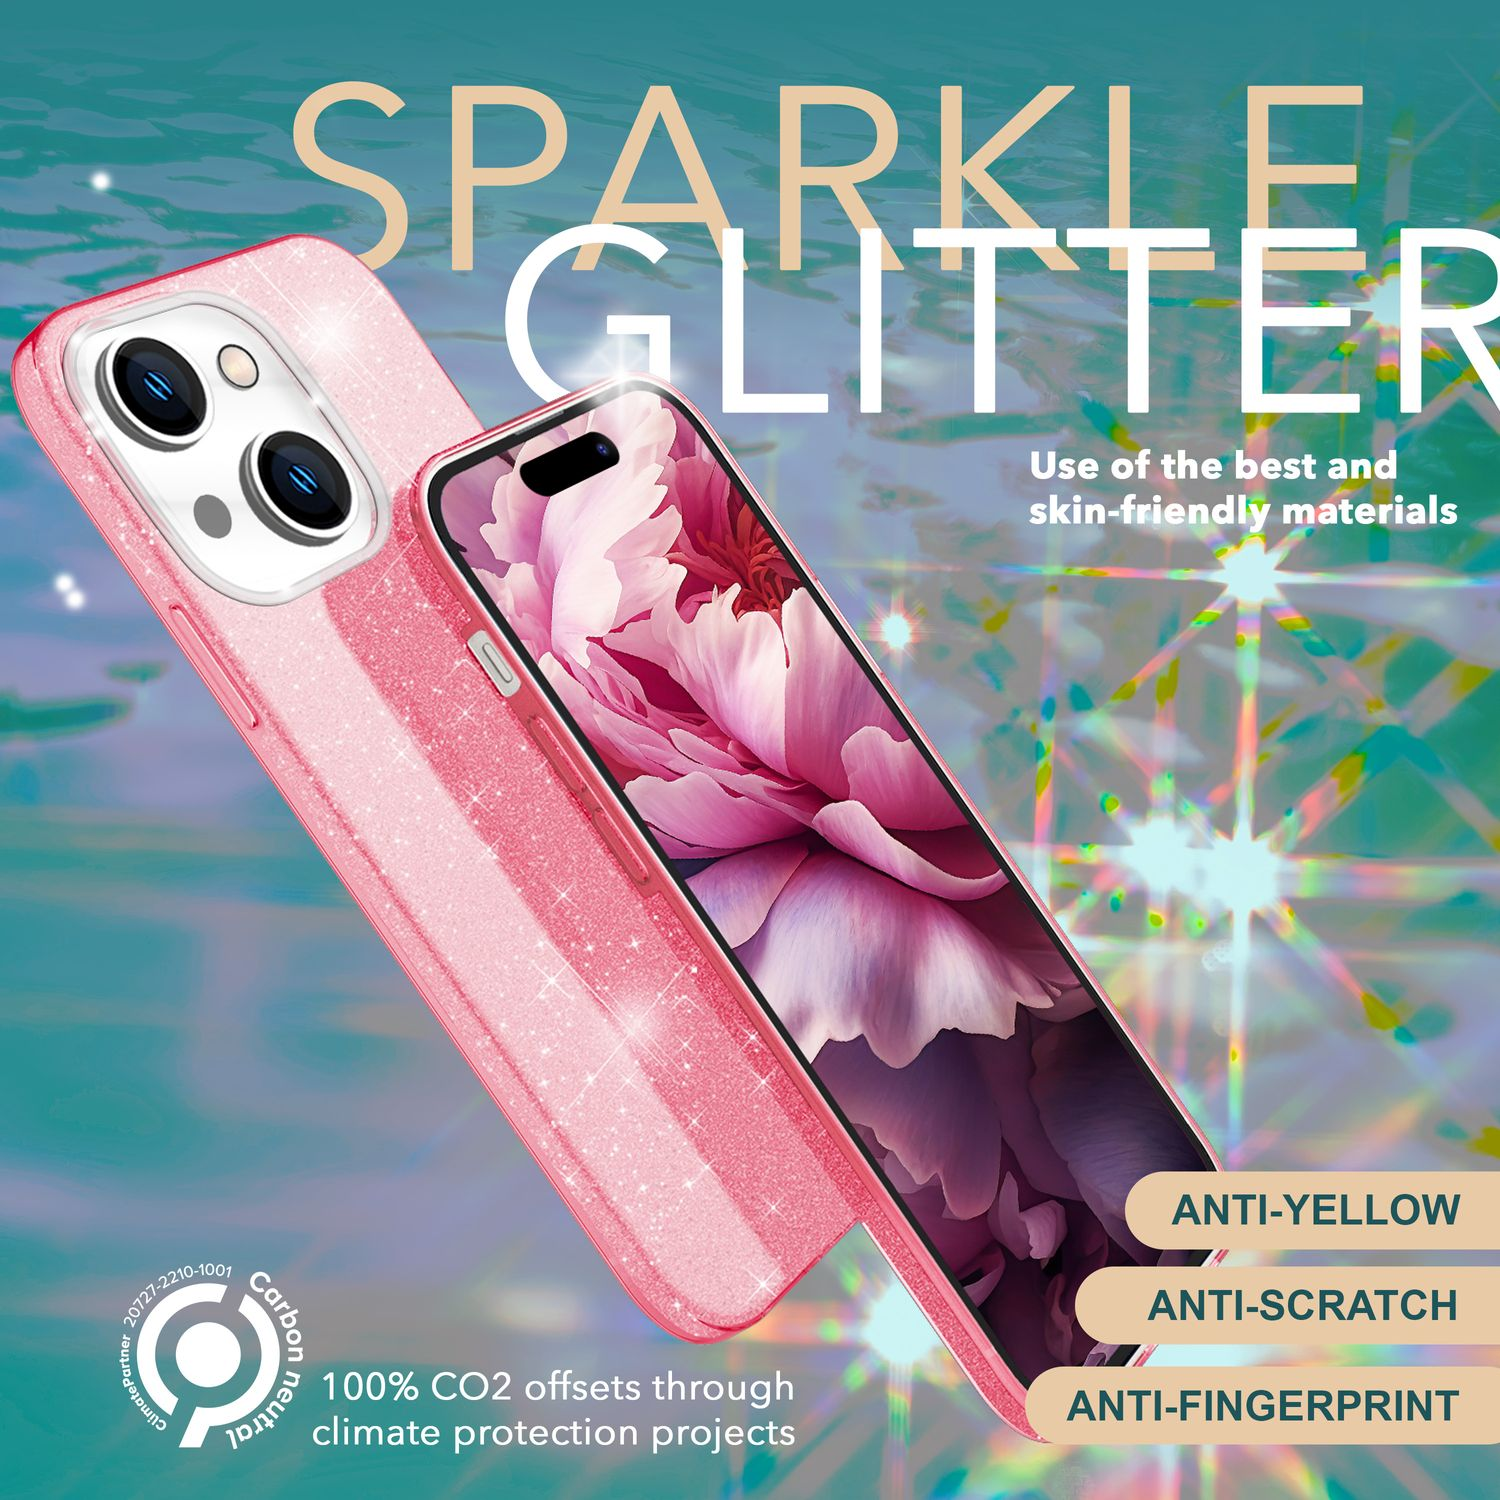 15, iPhone Backcover, NALIA Apple, Hülle, Pink Glitzer